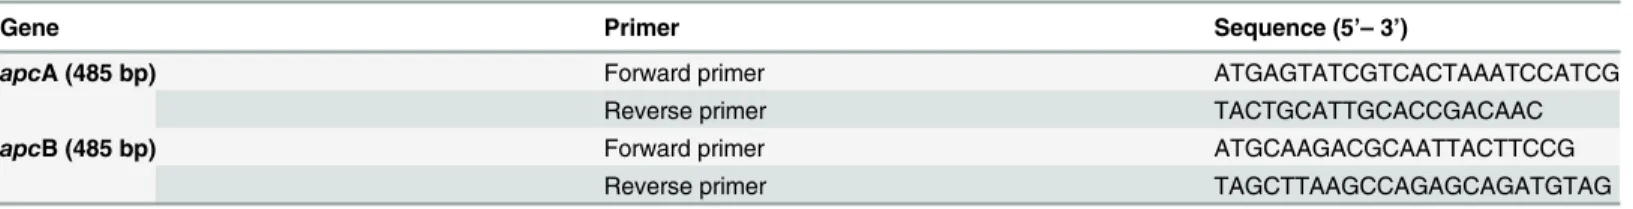 Table 1. List of designed primers for amplification of apcA and apcB genes.